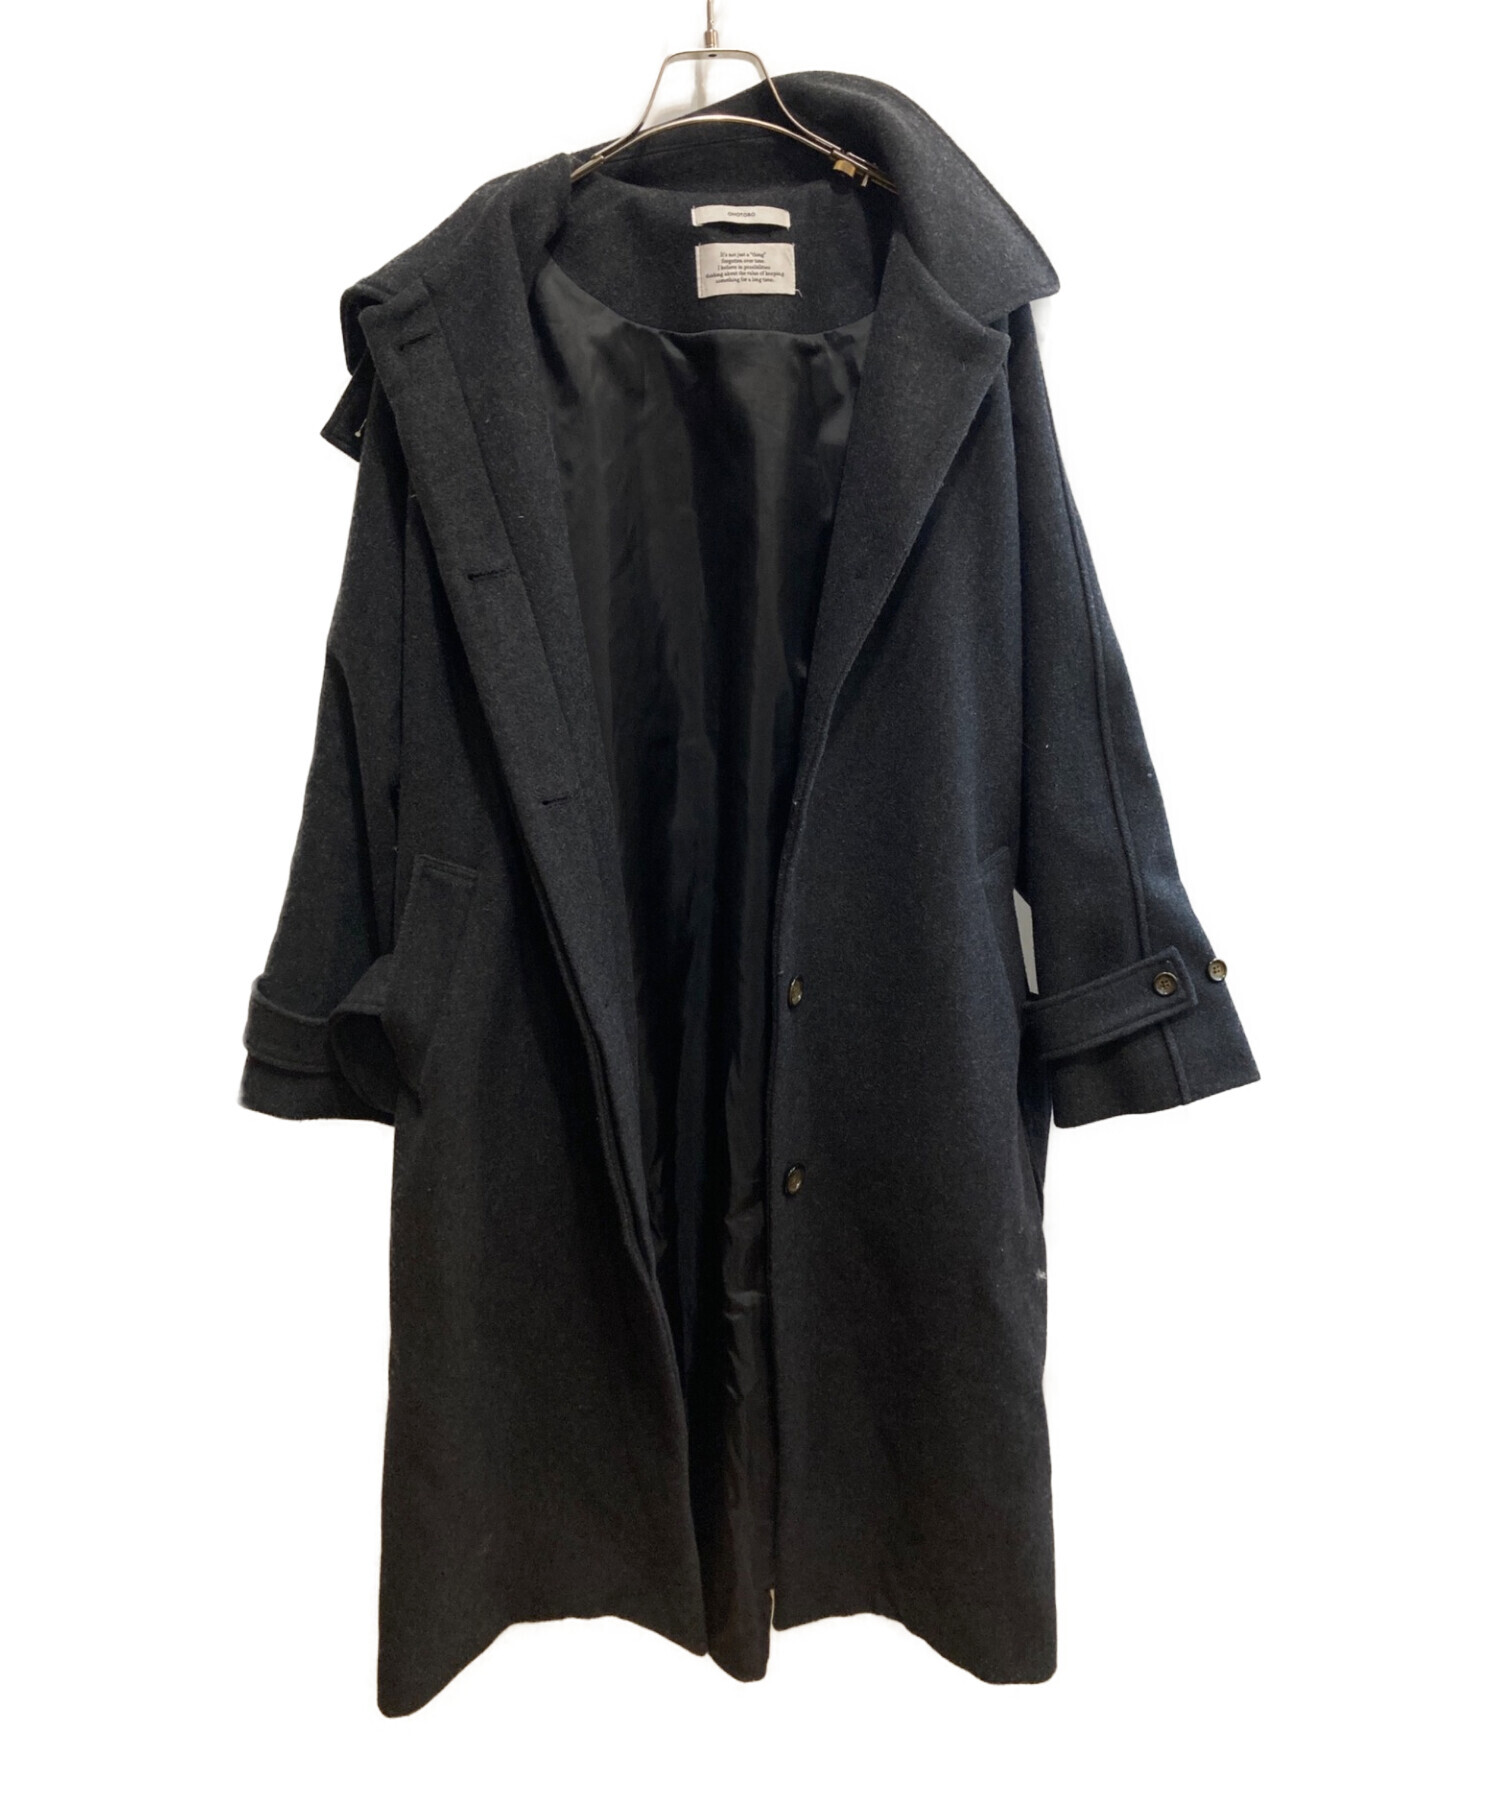 OHOTORO Dublin Coat charcoal 新品未使用 | camillevieraservices.com